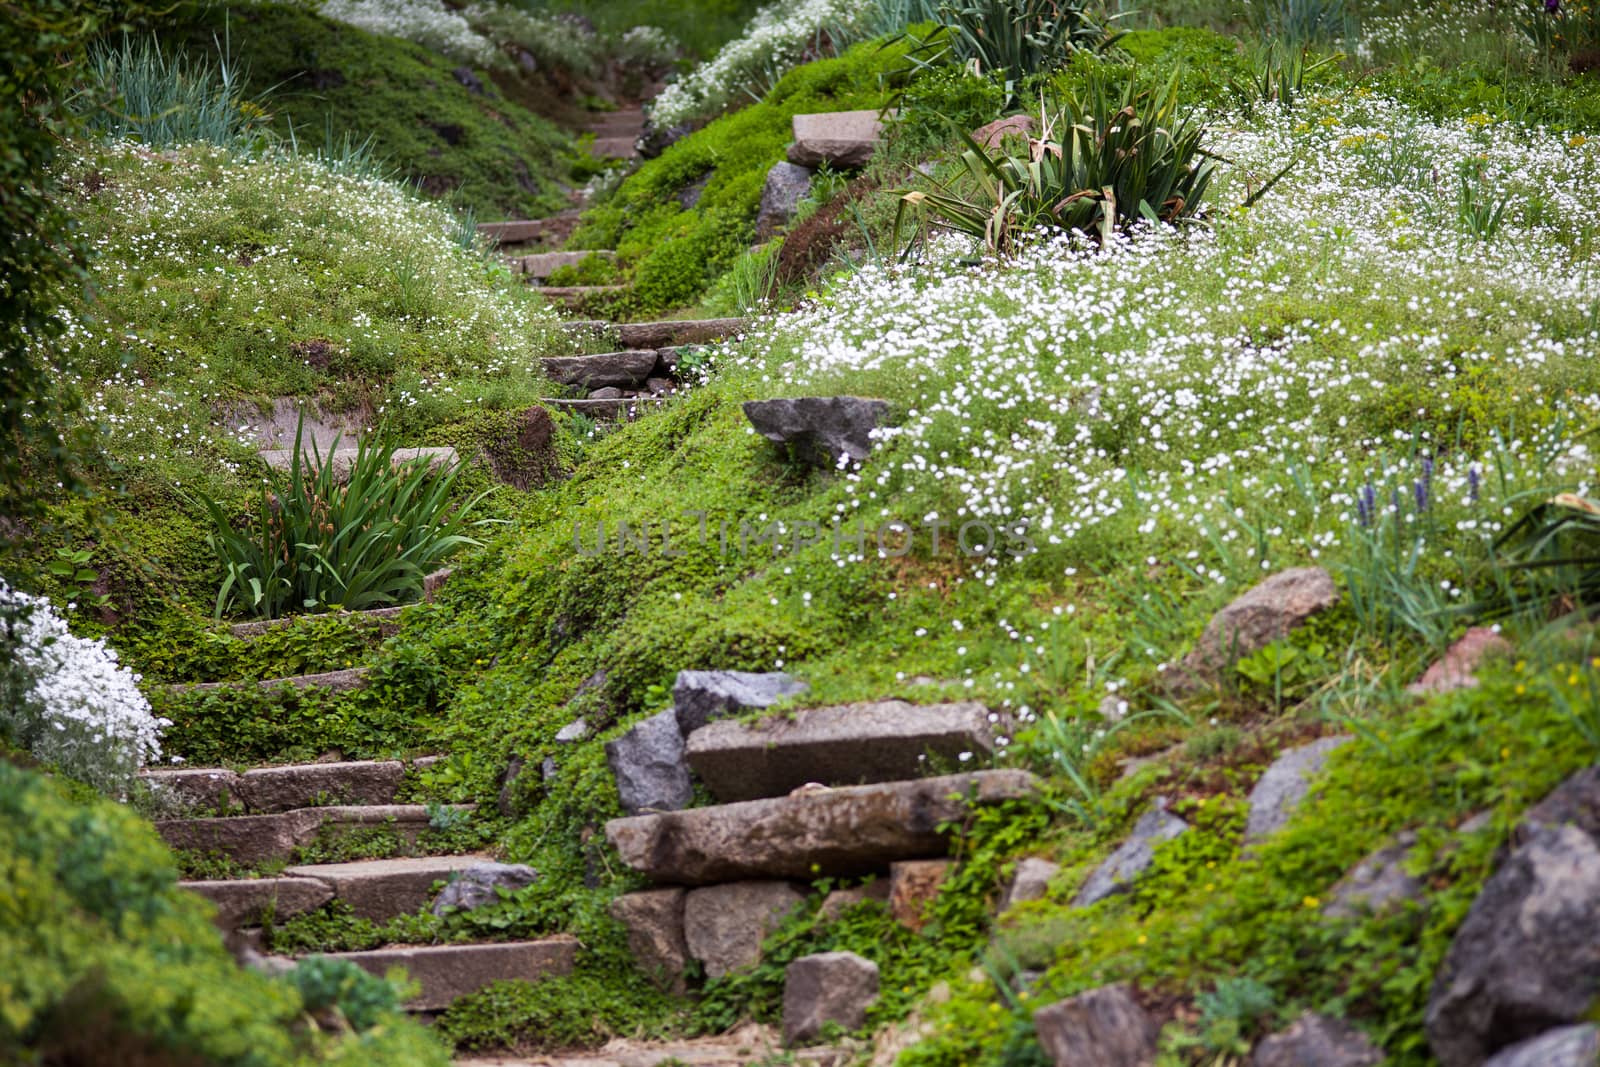 Stony stairs in the green blooming garden.